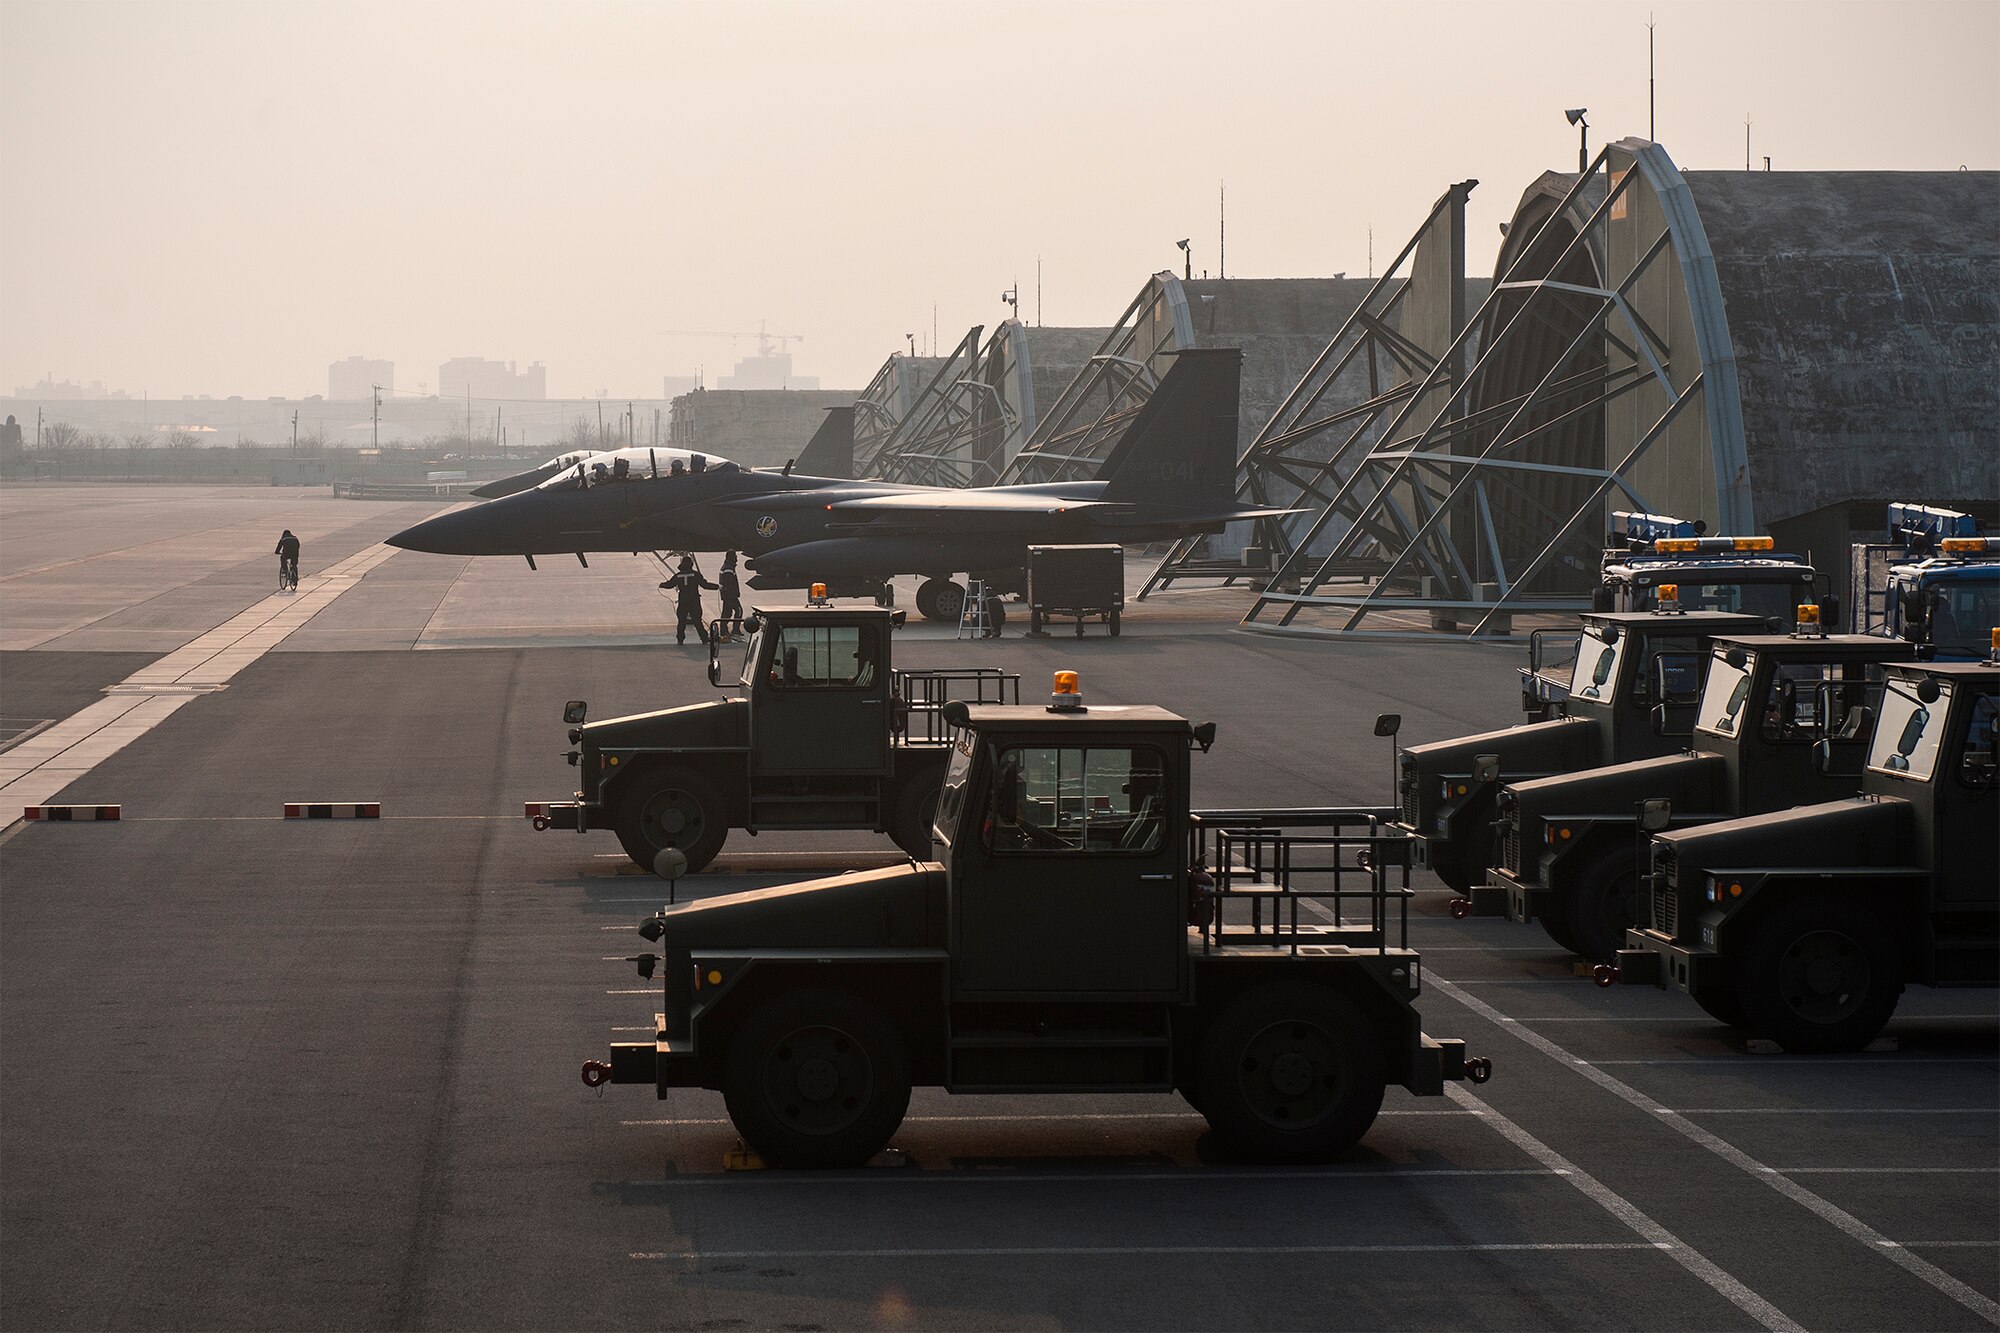 An F-15K Slam Eagle from the South Korean air force’s 11th Fighter Wing prepares to taxi on the runway during exercise Buddy Wing 15-2 Feb. 5, 2015, at Daegu Air Base, South Korea. During the four-day exercise, pilots from the 8th FW exchanged tactics and procedures with their South Korean counterparts. (U.S. Air Force photo/Senior Airman Katrina Heikkinen)